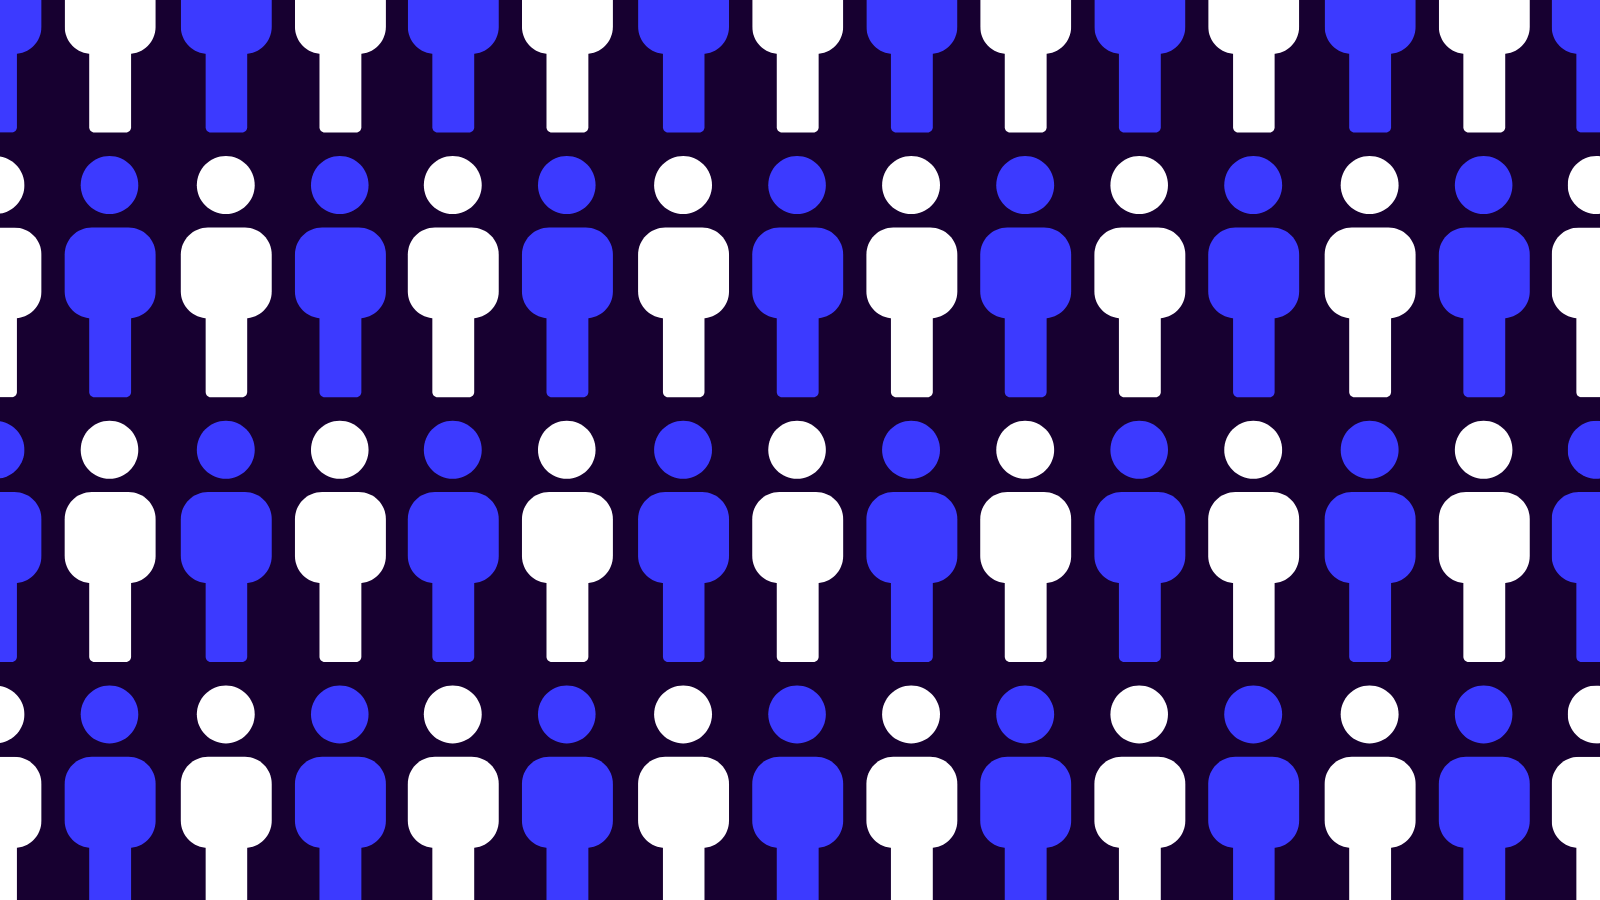 Blue and white person icons on a dark background.